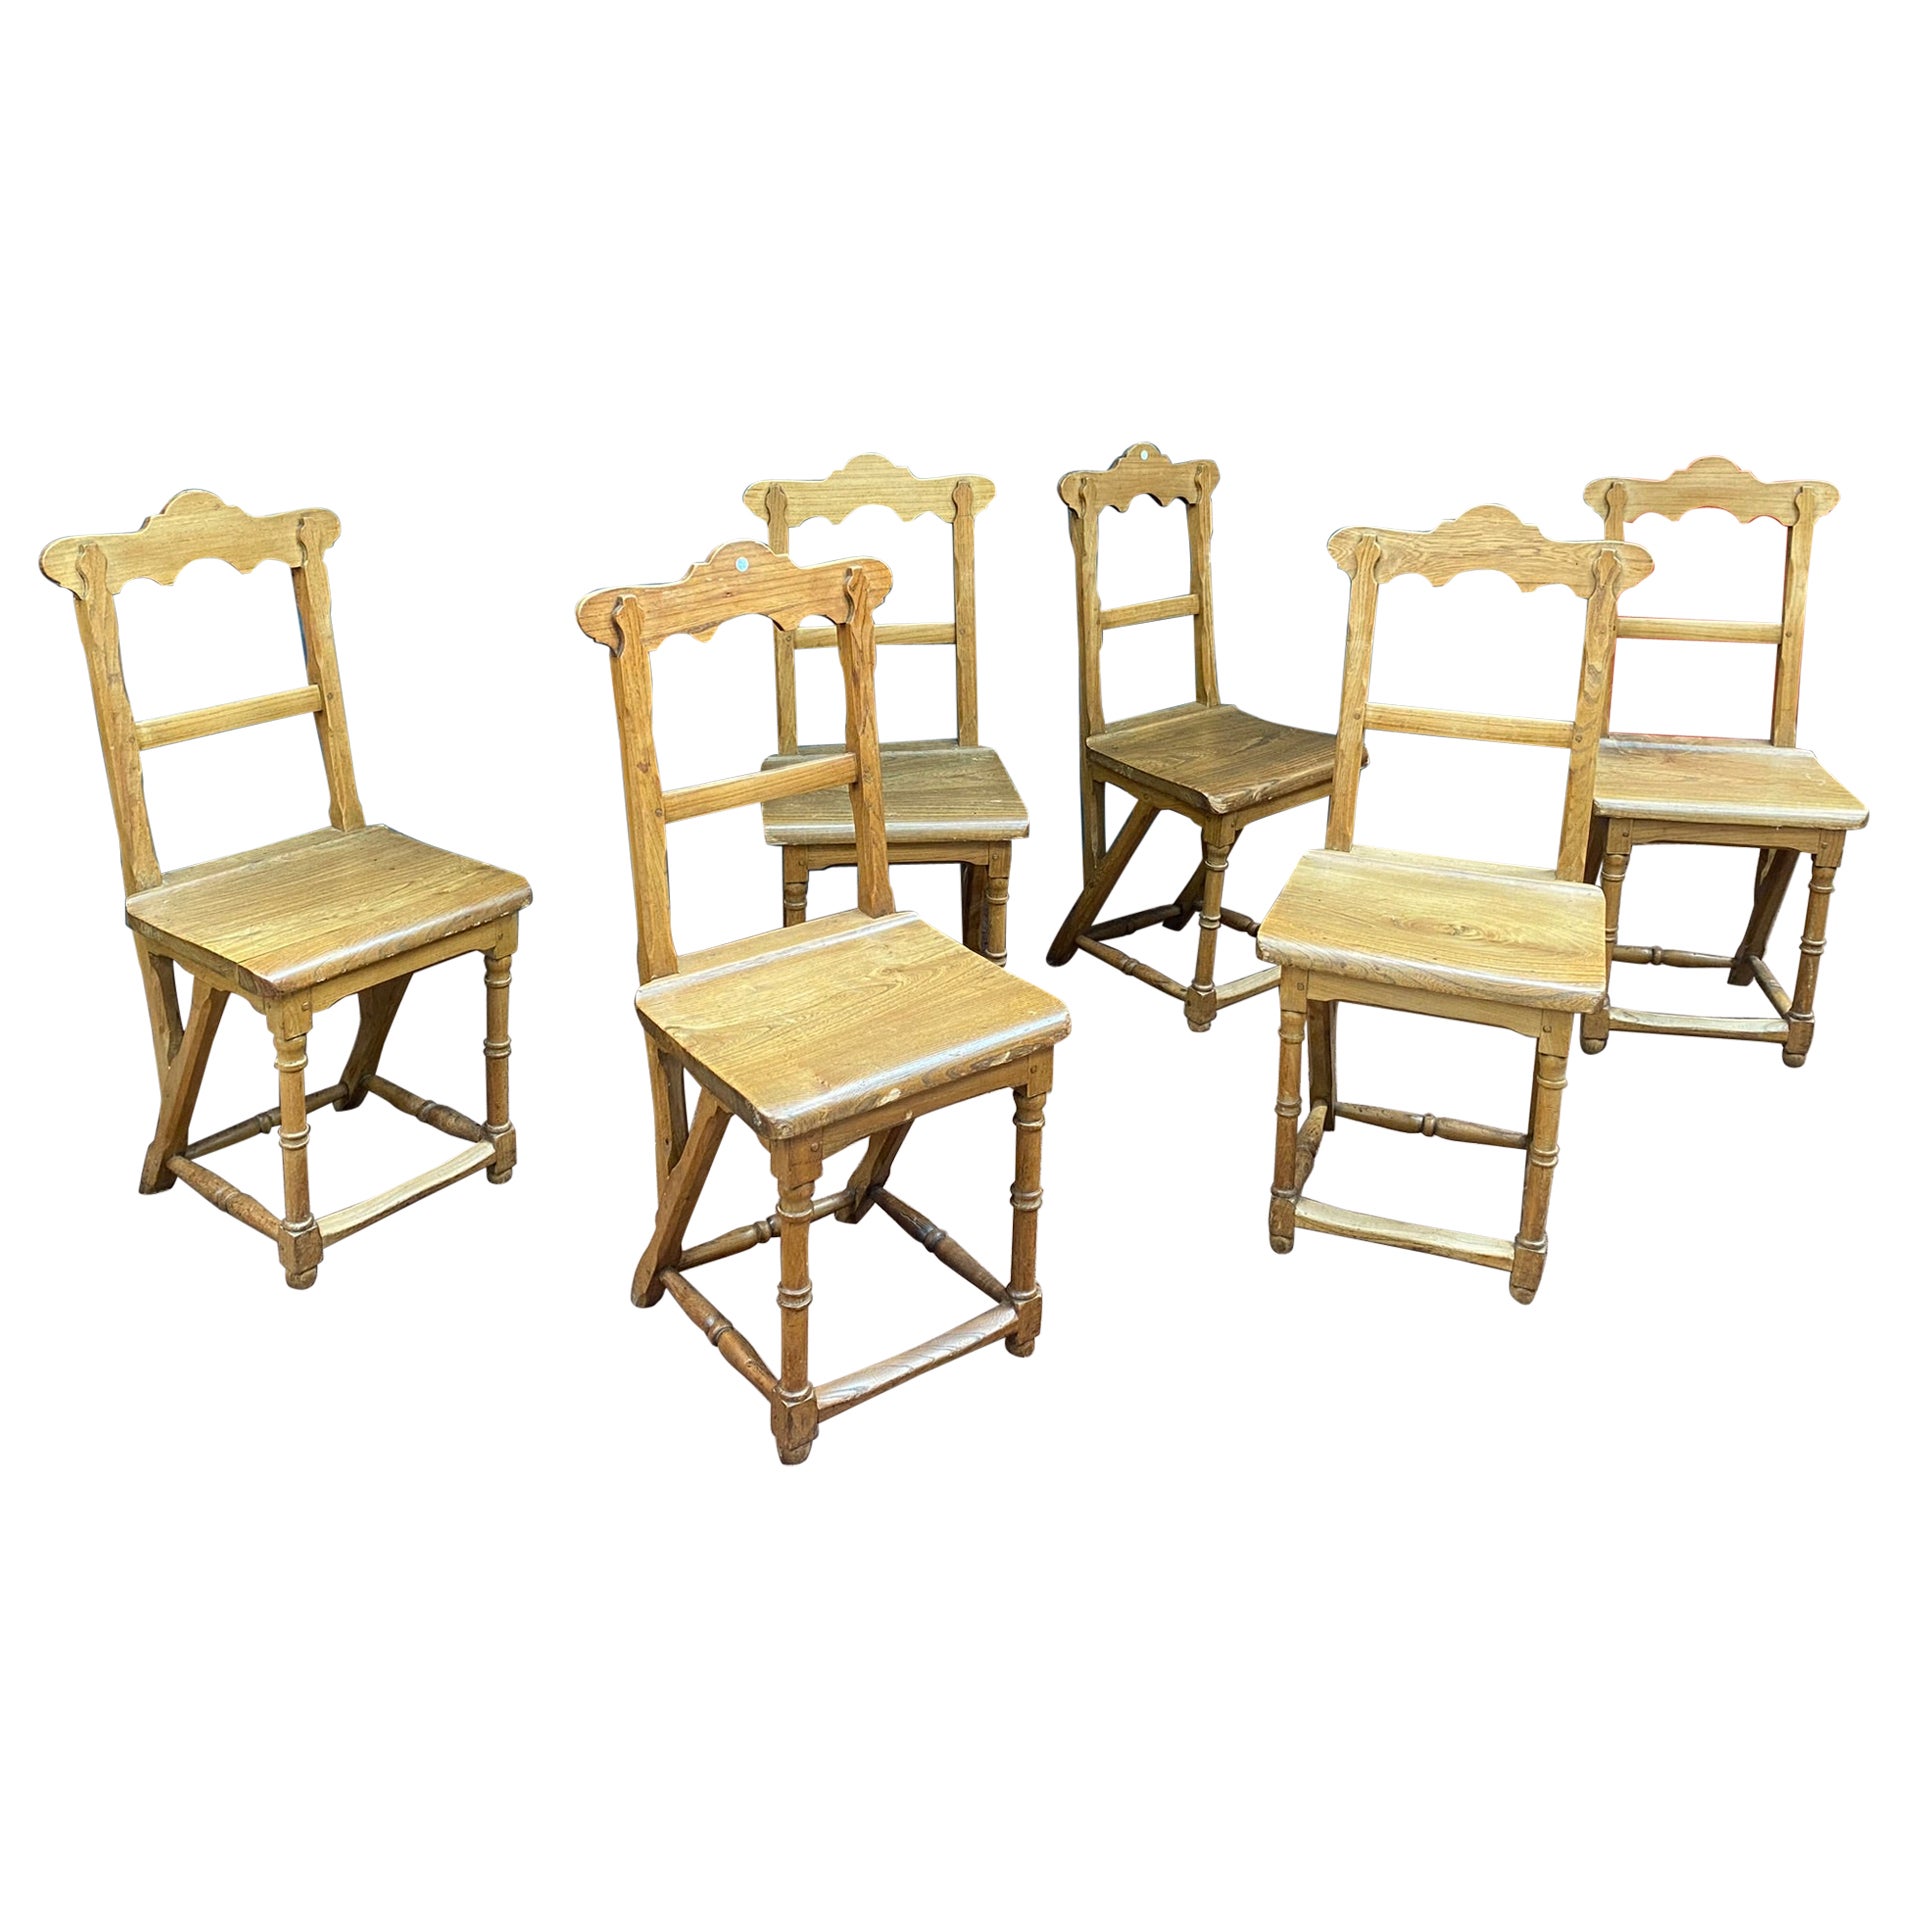 6 Mountain Chairs, in ELM, circa 1900 For Sale